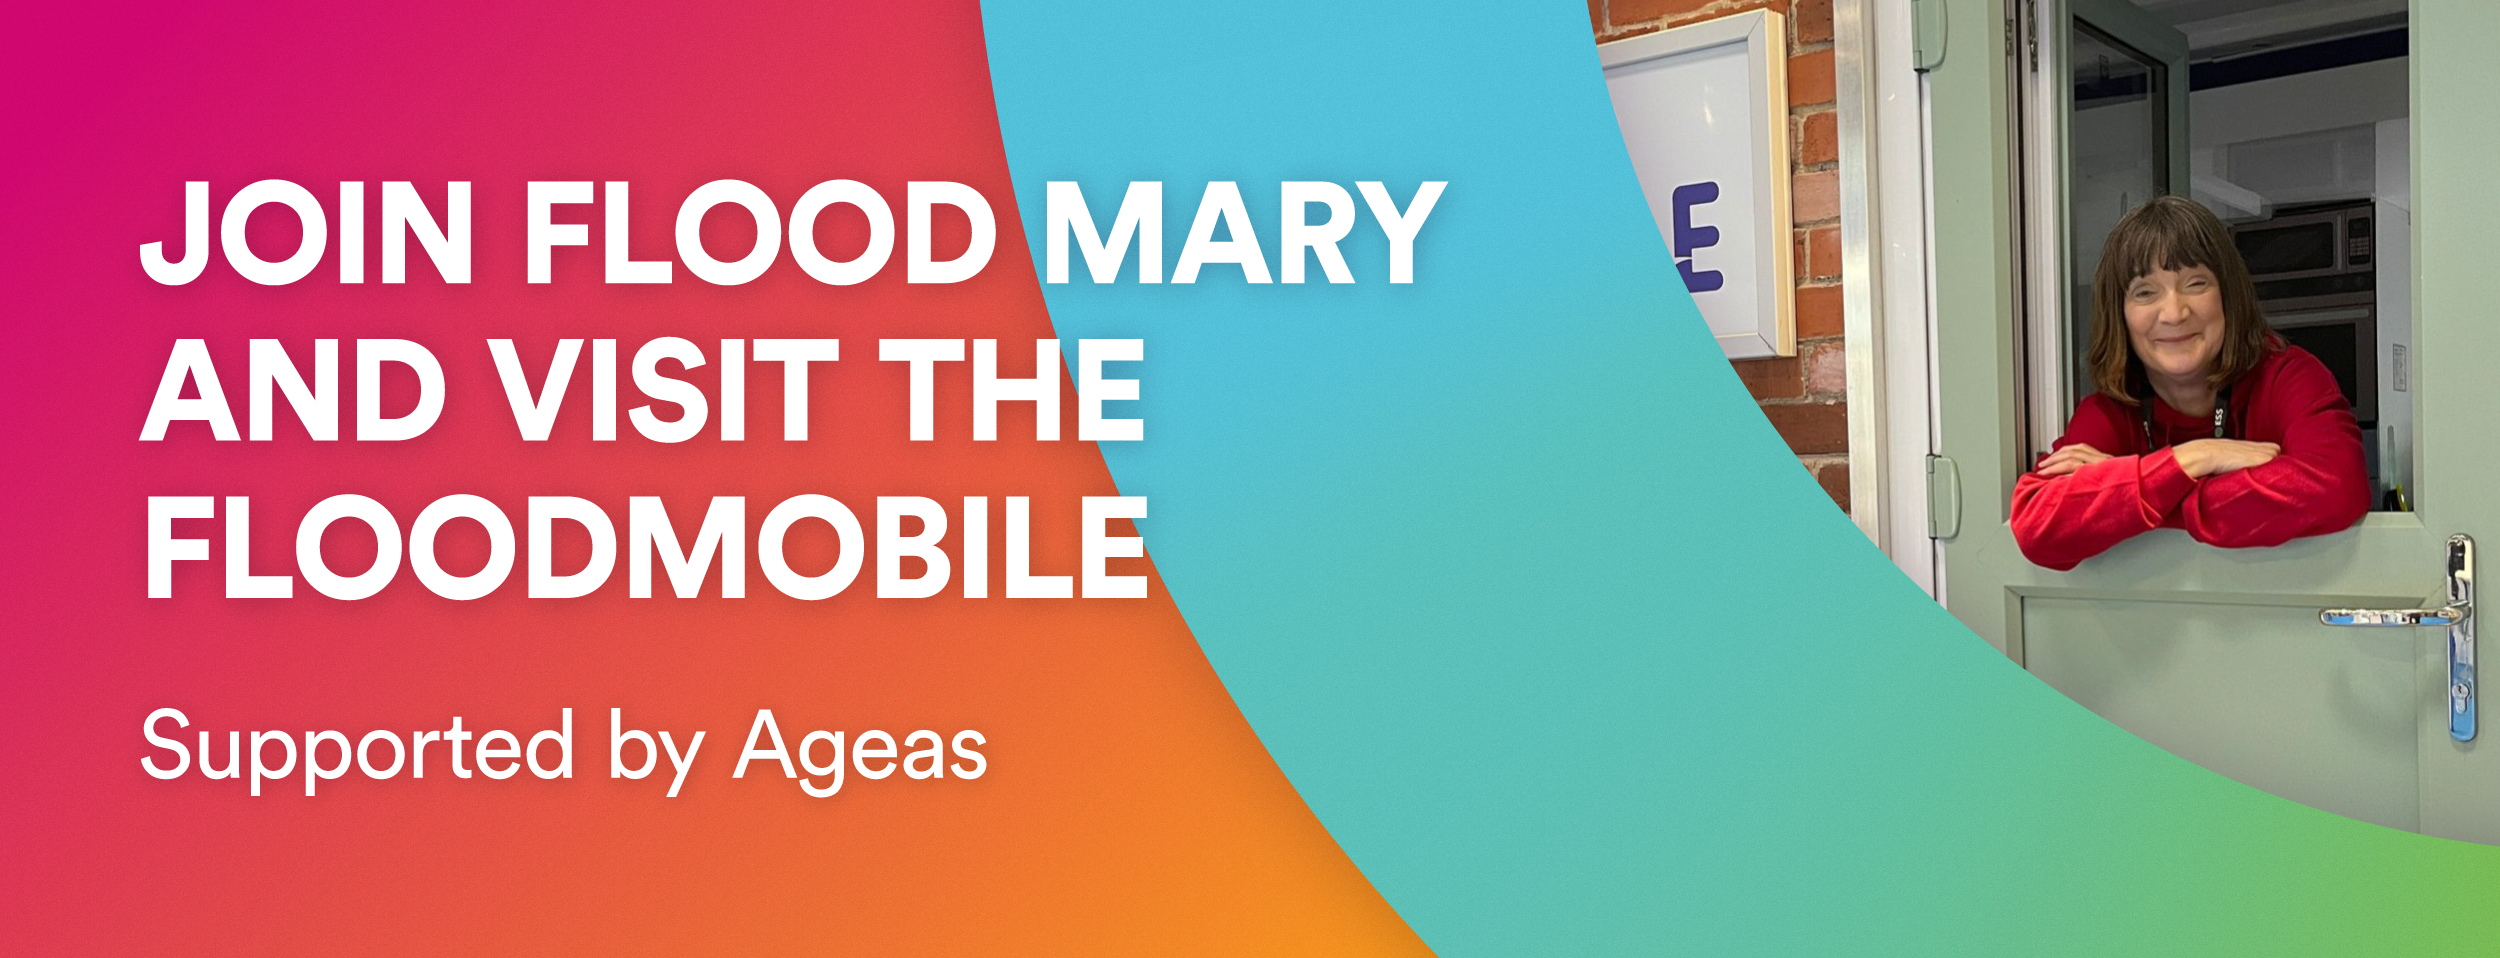 Join Flood Mary and visit the Floodmobile supported by Ageas